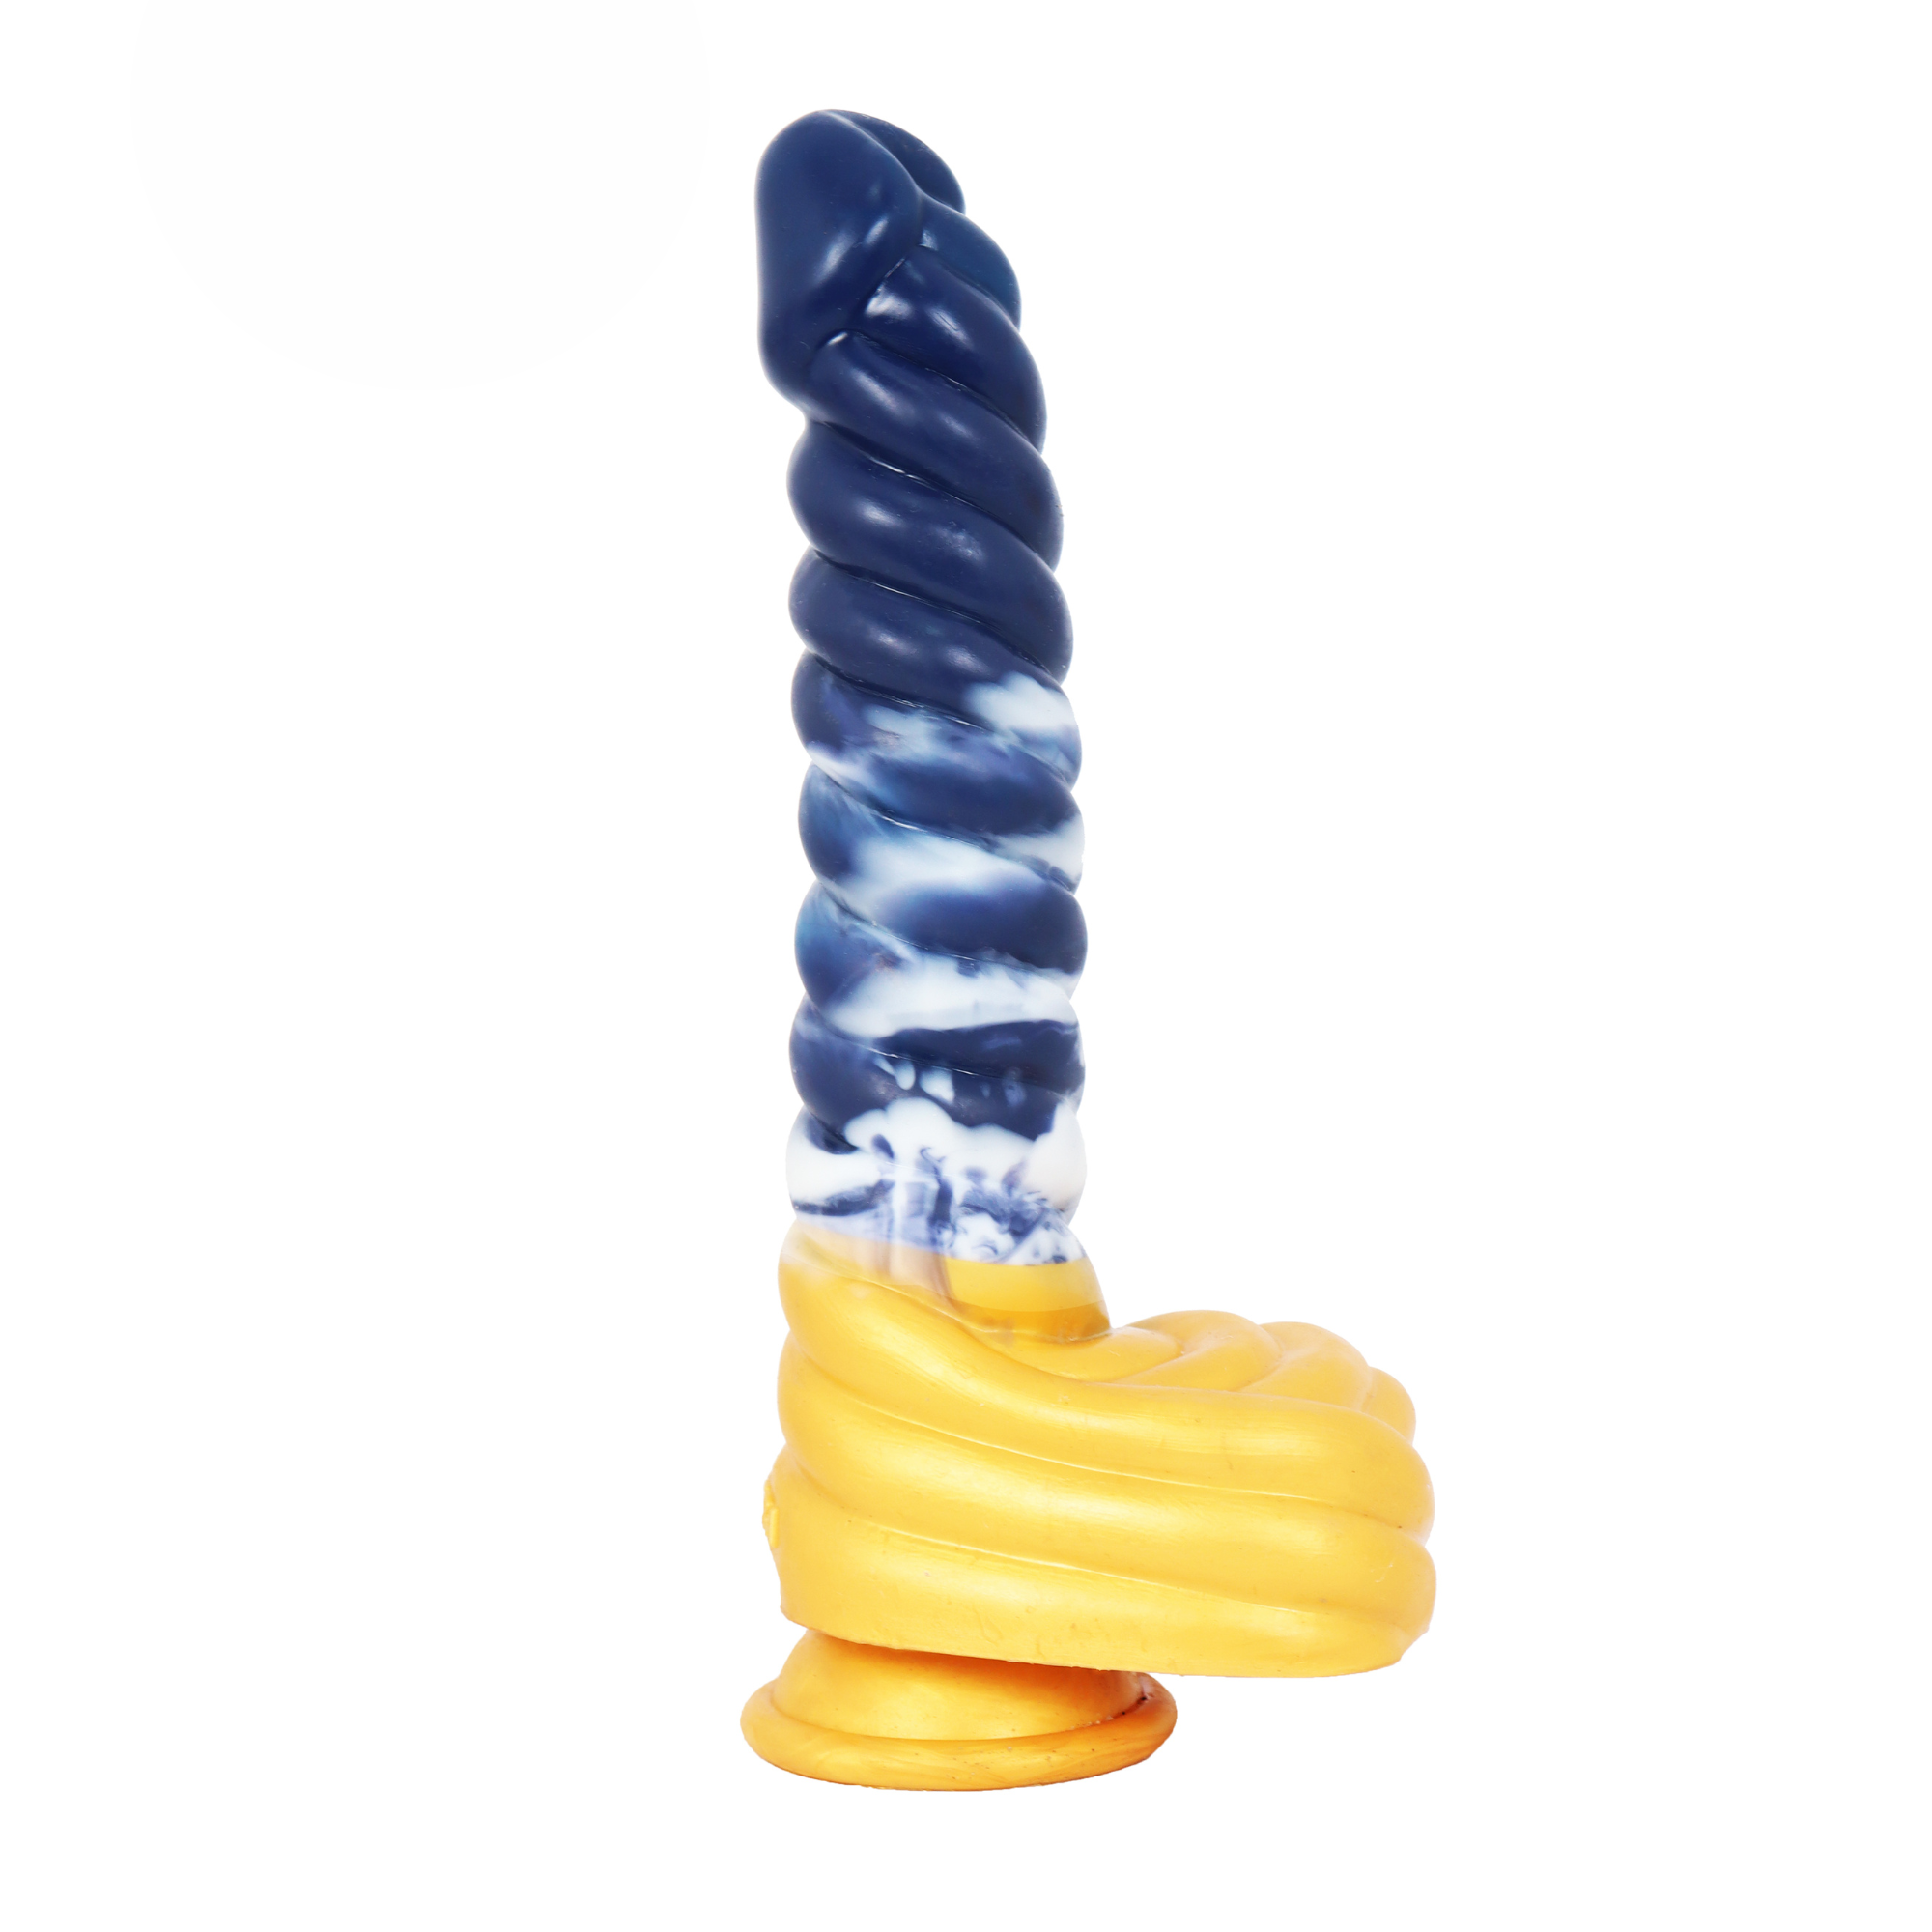 Spiral Dildo with Scrotum